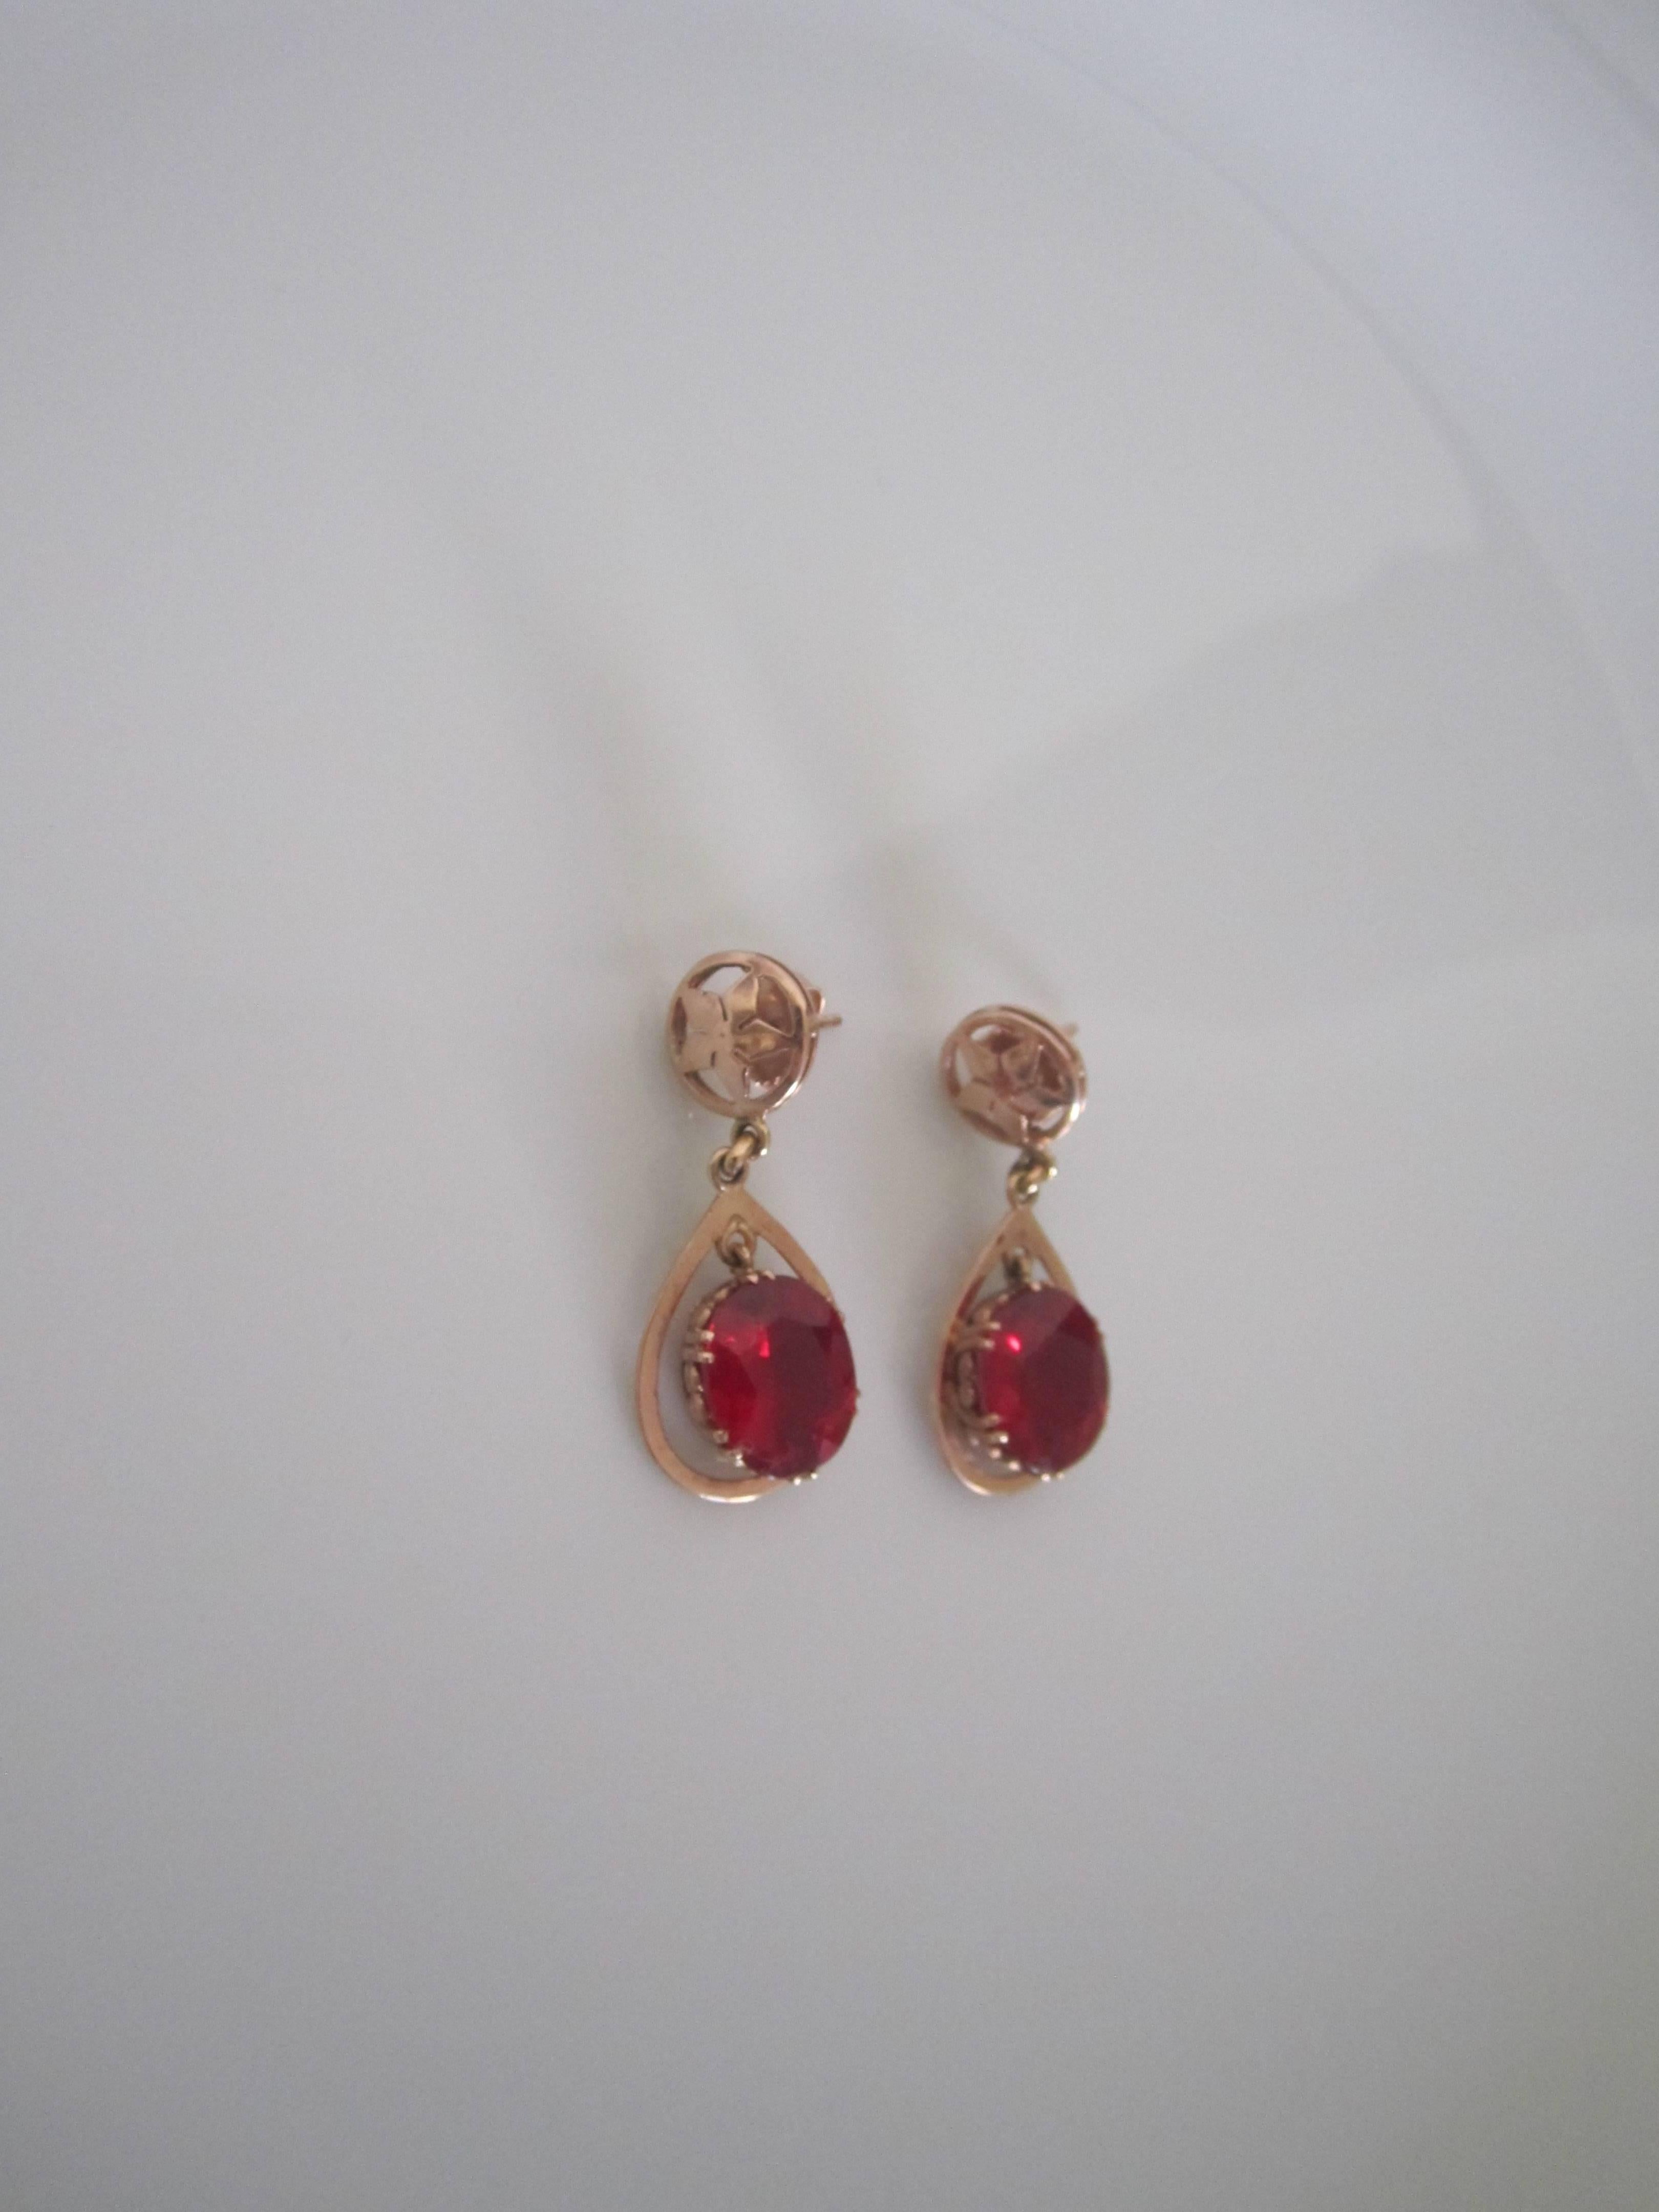 Mid-20th Century Vintage 14-Karat Pink Gold Earrings with Red Ruby Style Stones